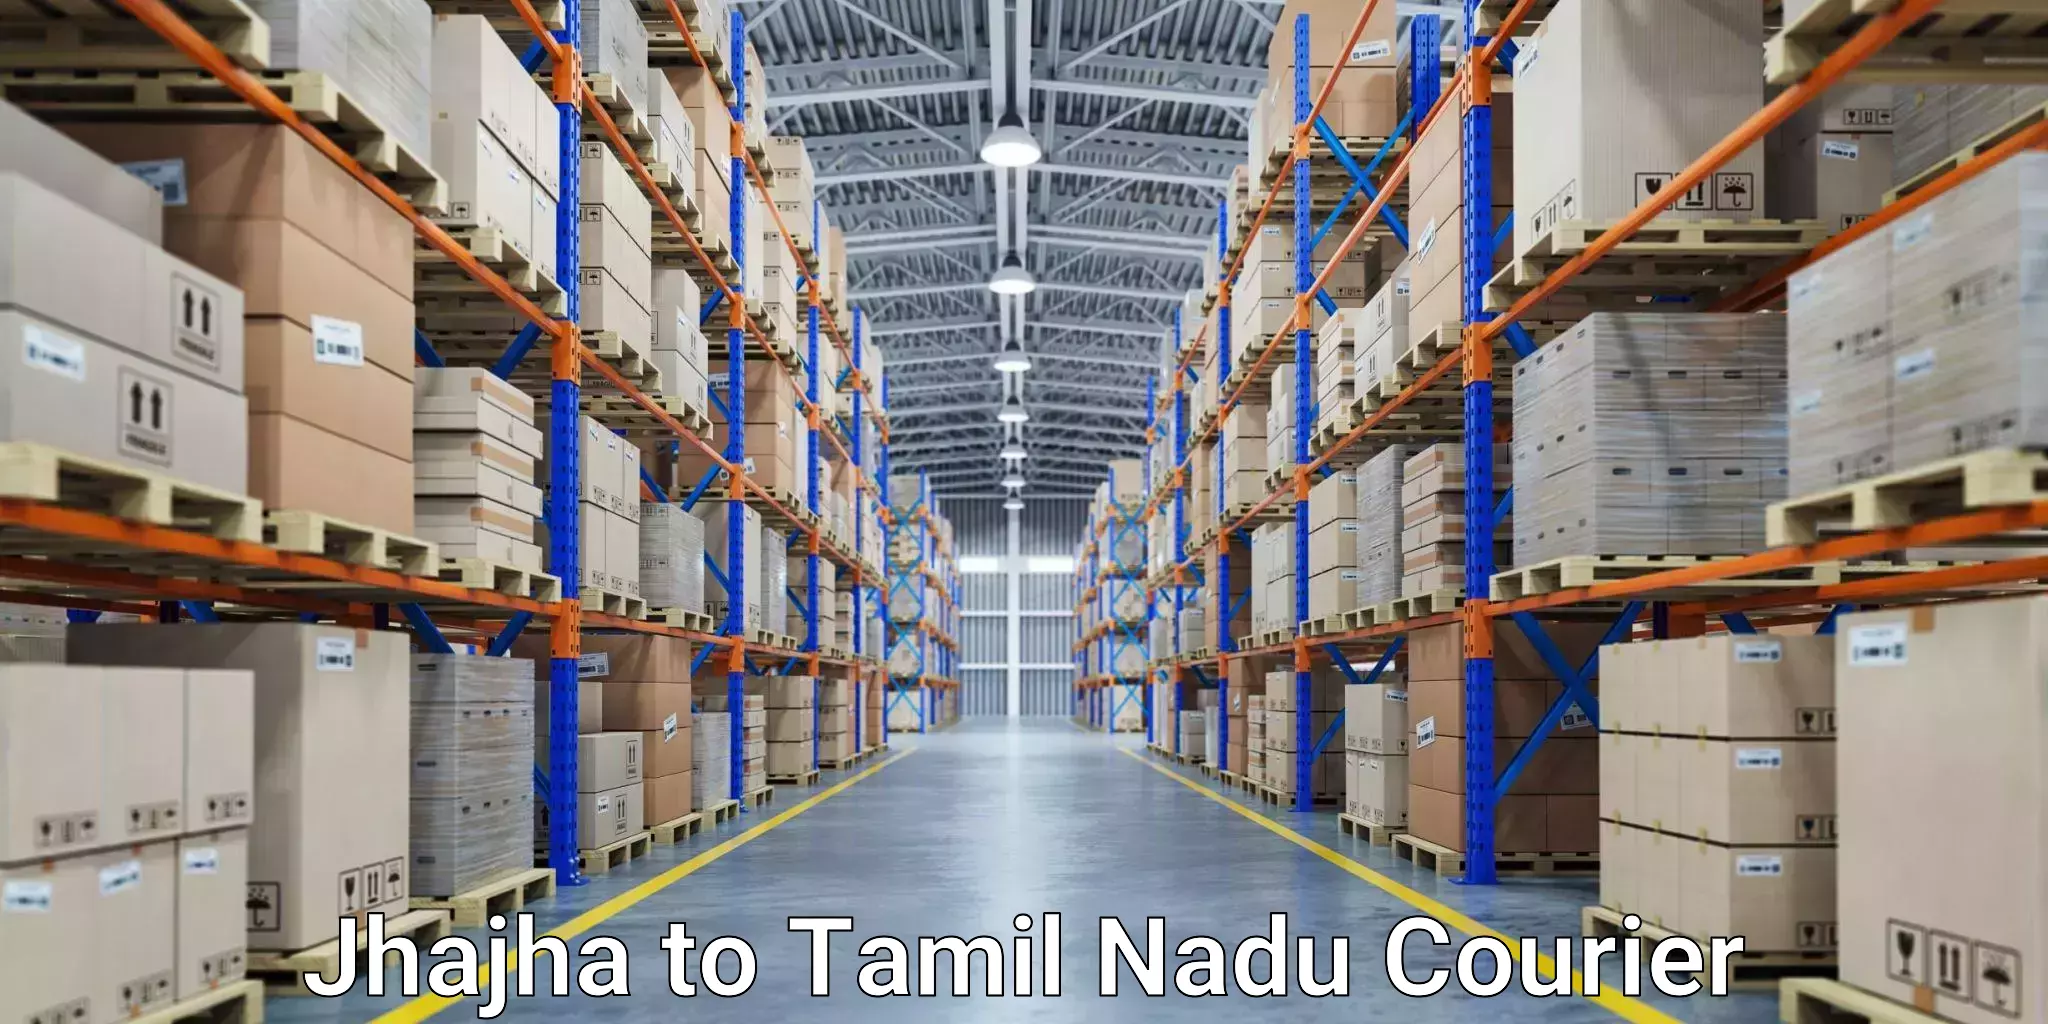 Courier rate comparison Jhajha to Vellore Institute of Technology